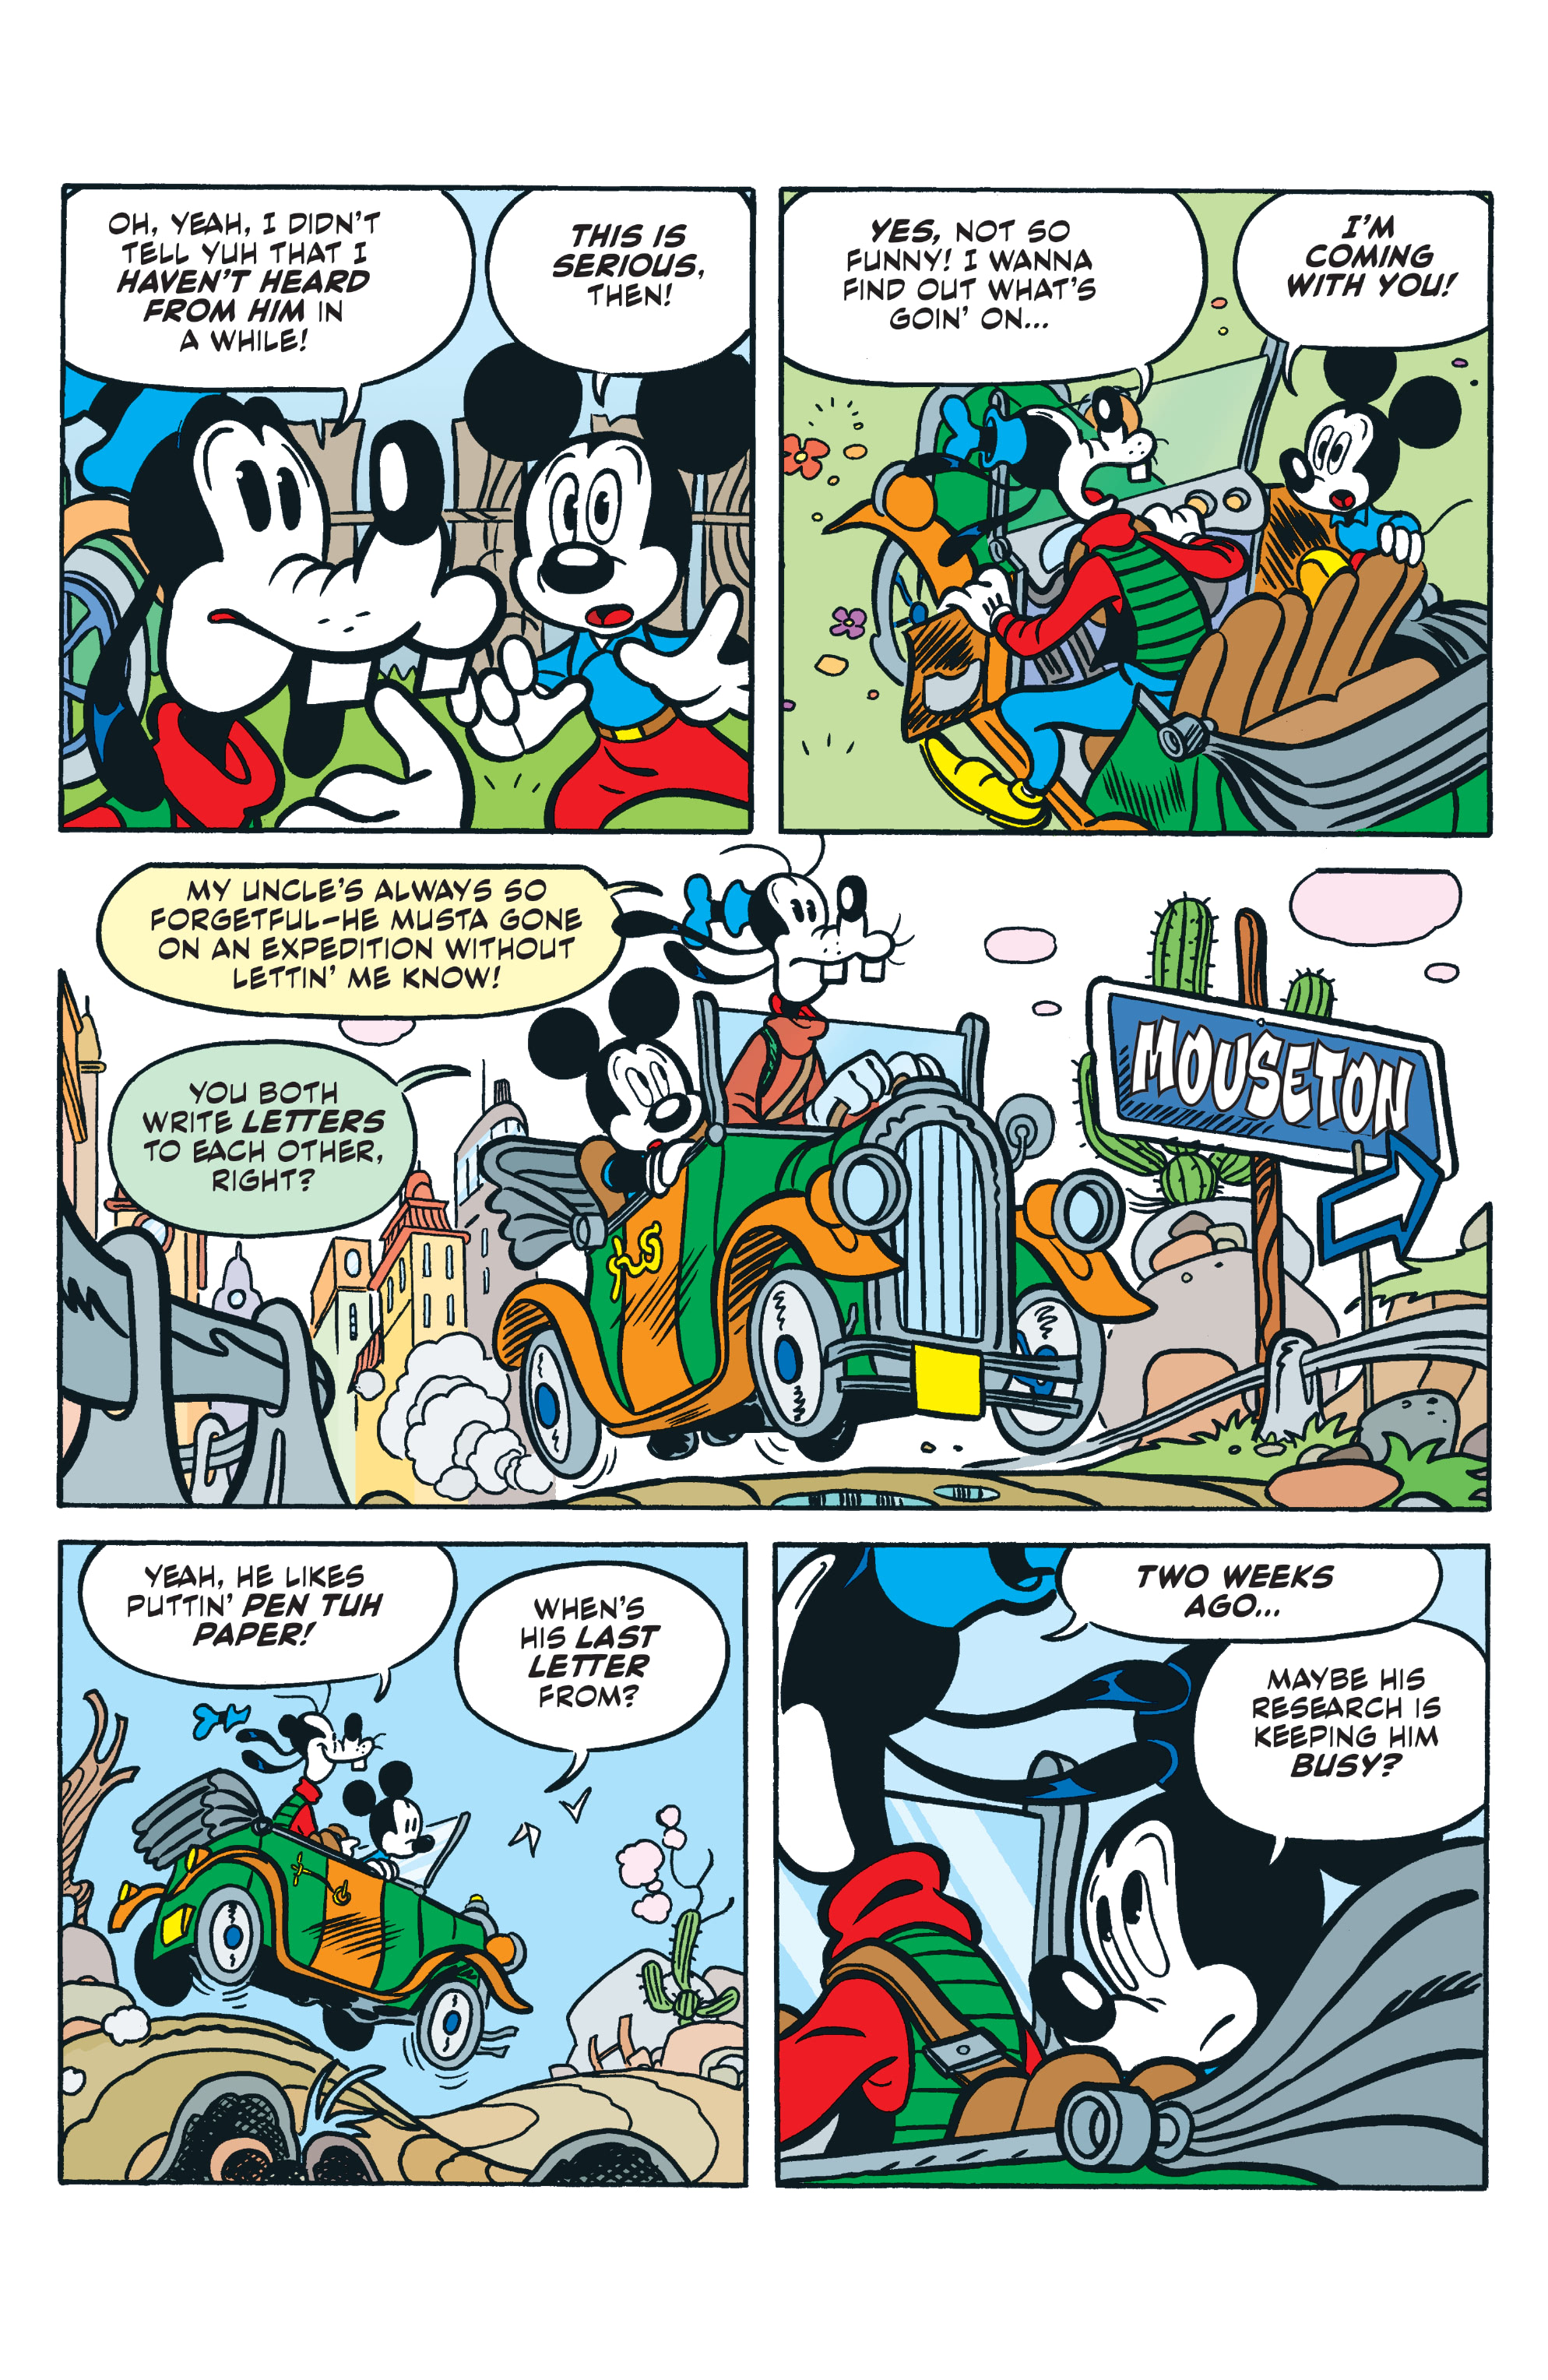 Disney Comics and Stories (2018-): Chapter 12 - Page 4